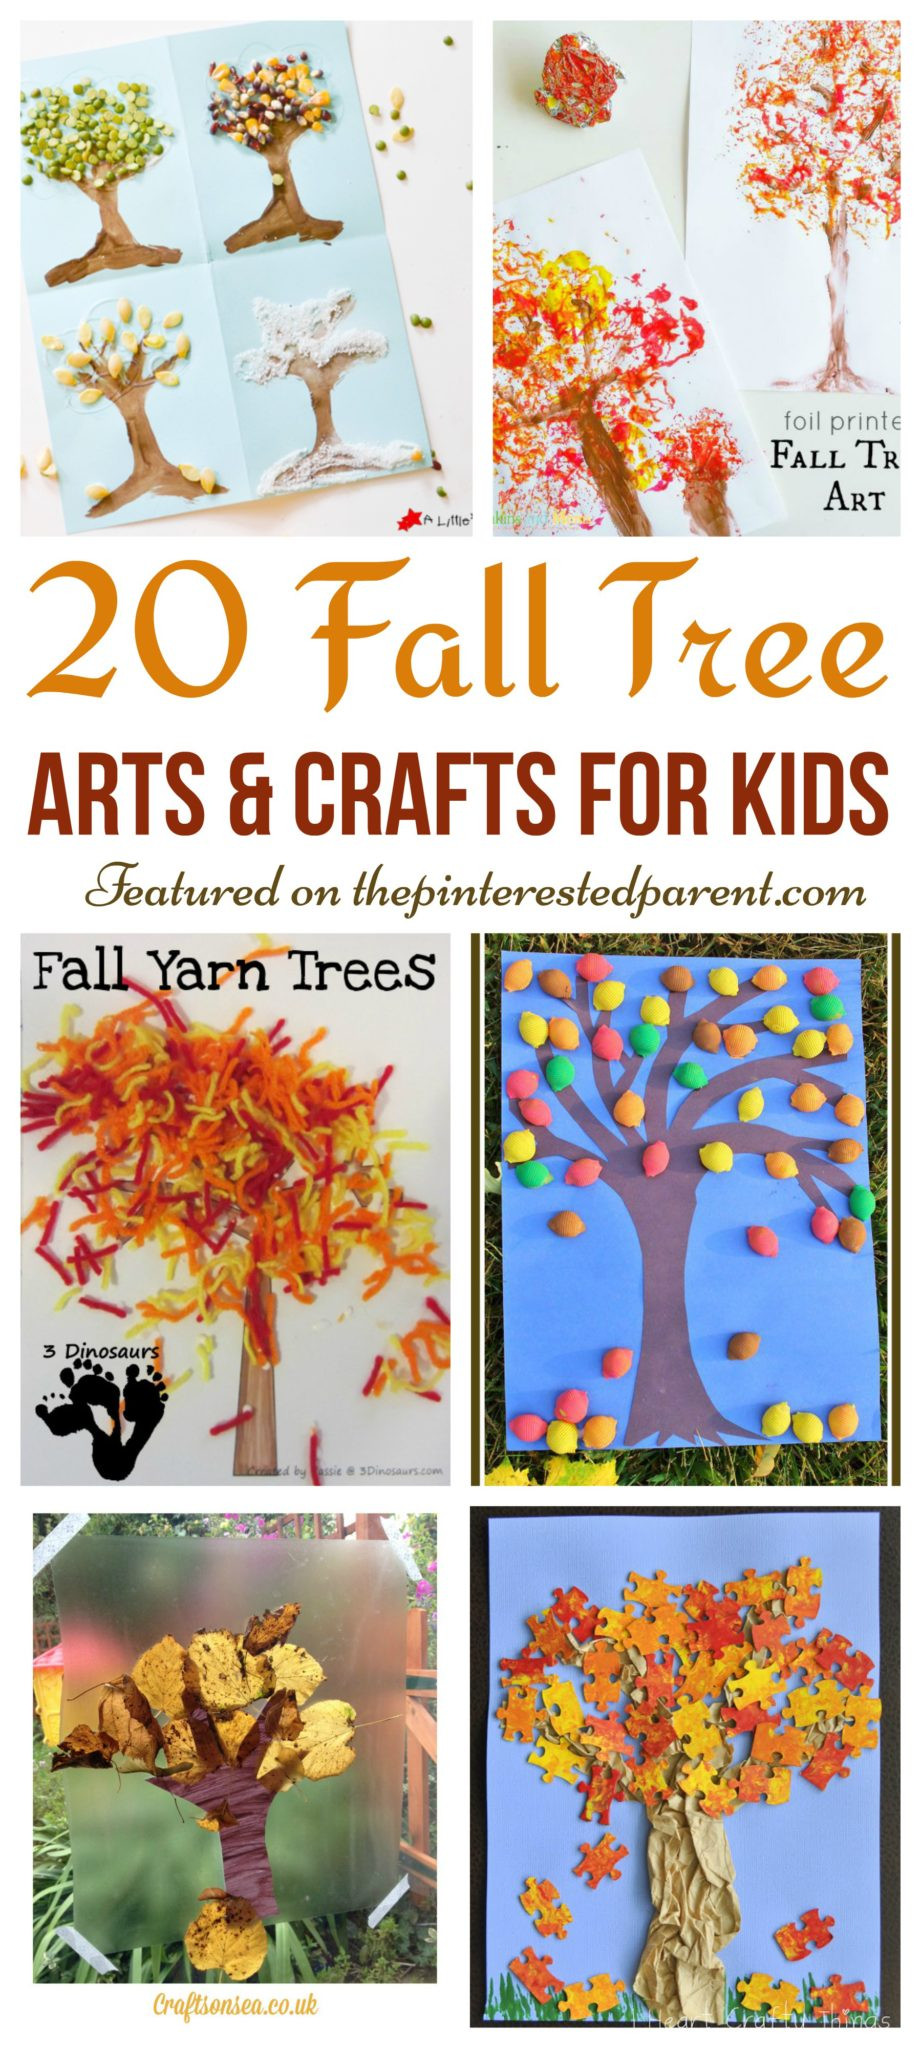 Craft Projects For Preschoolers
 20 Fall Tree Arts & Crafts Ideas For Kids – The